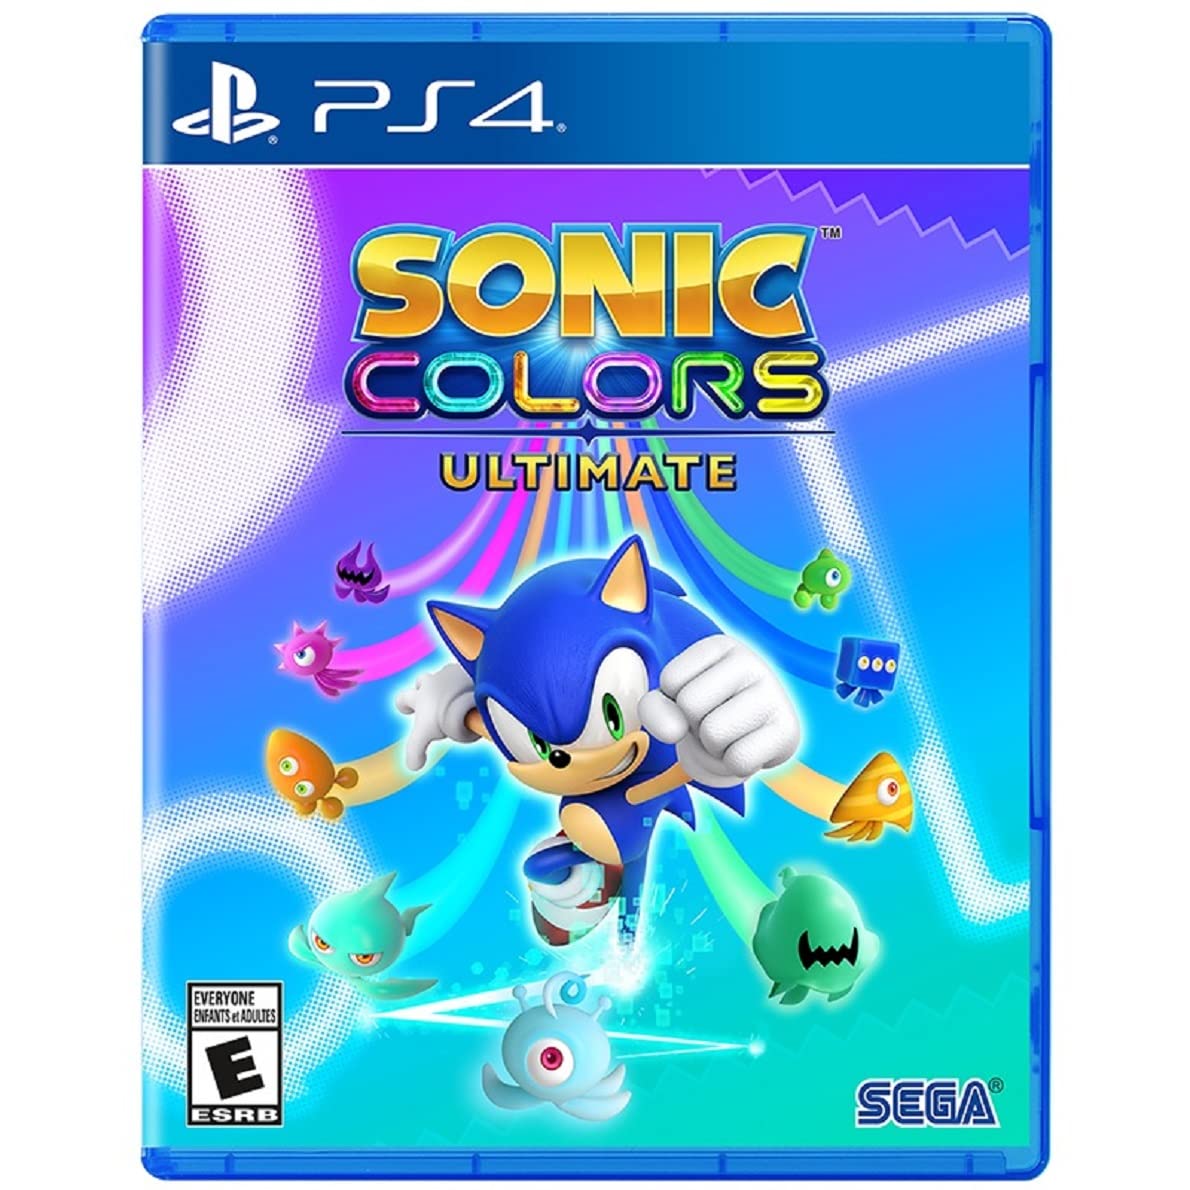 Sonic Colors Ultimate: Standard Edition - PlayStation 4